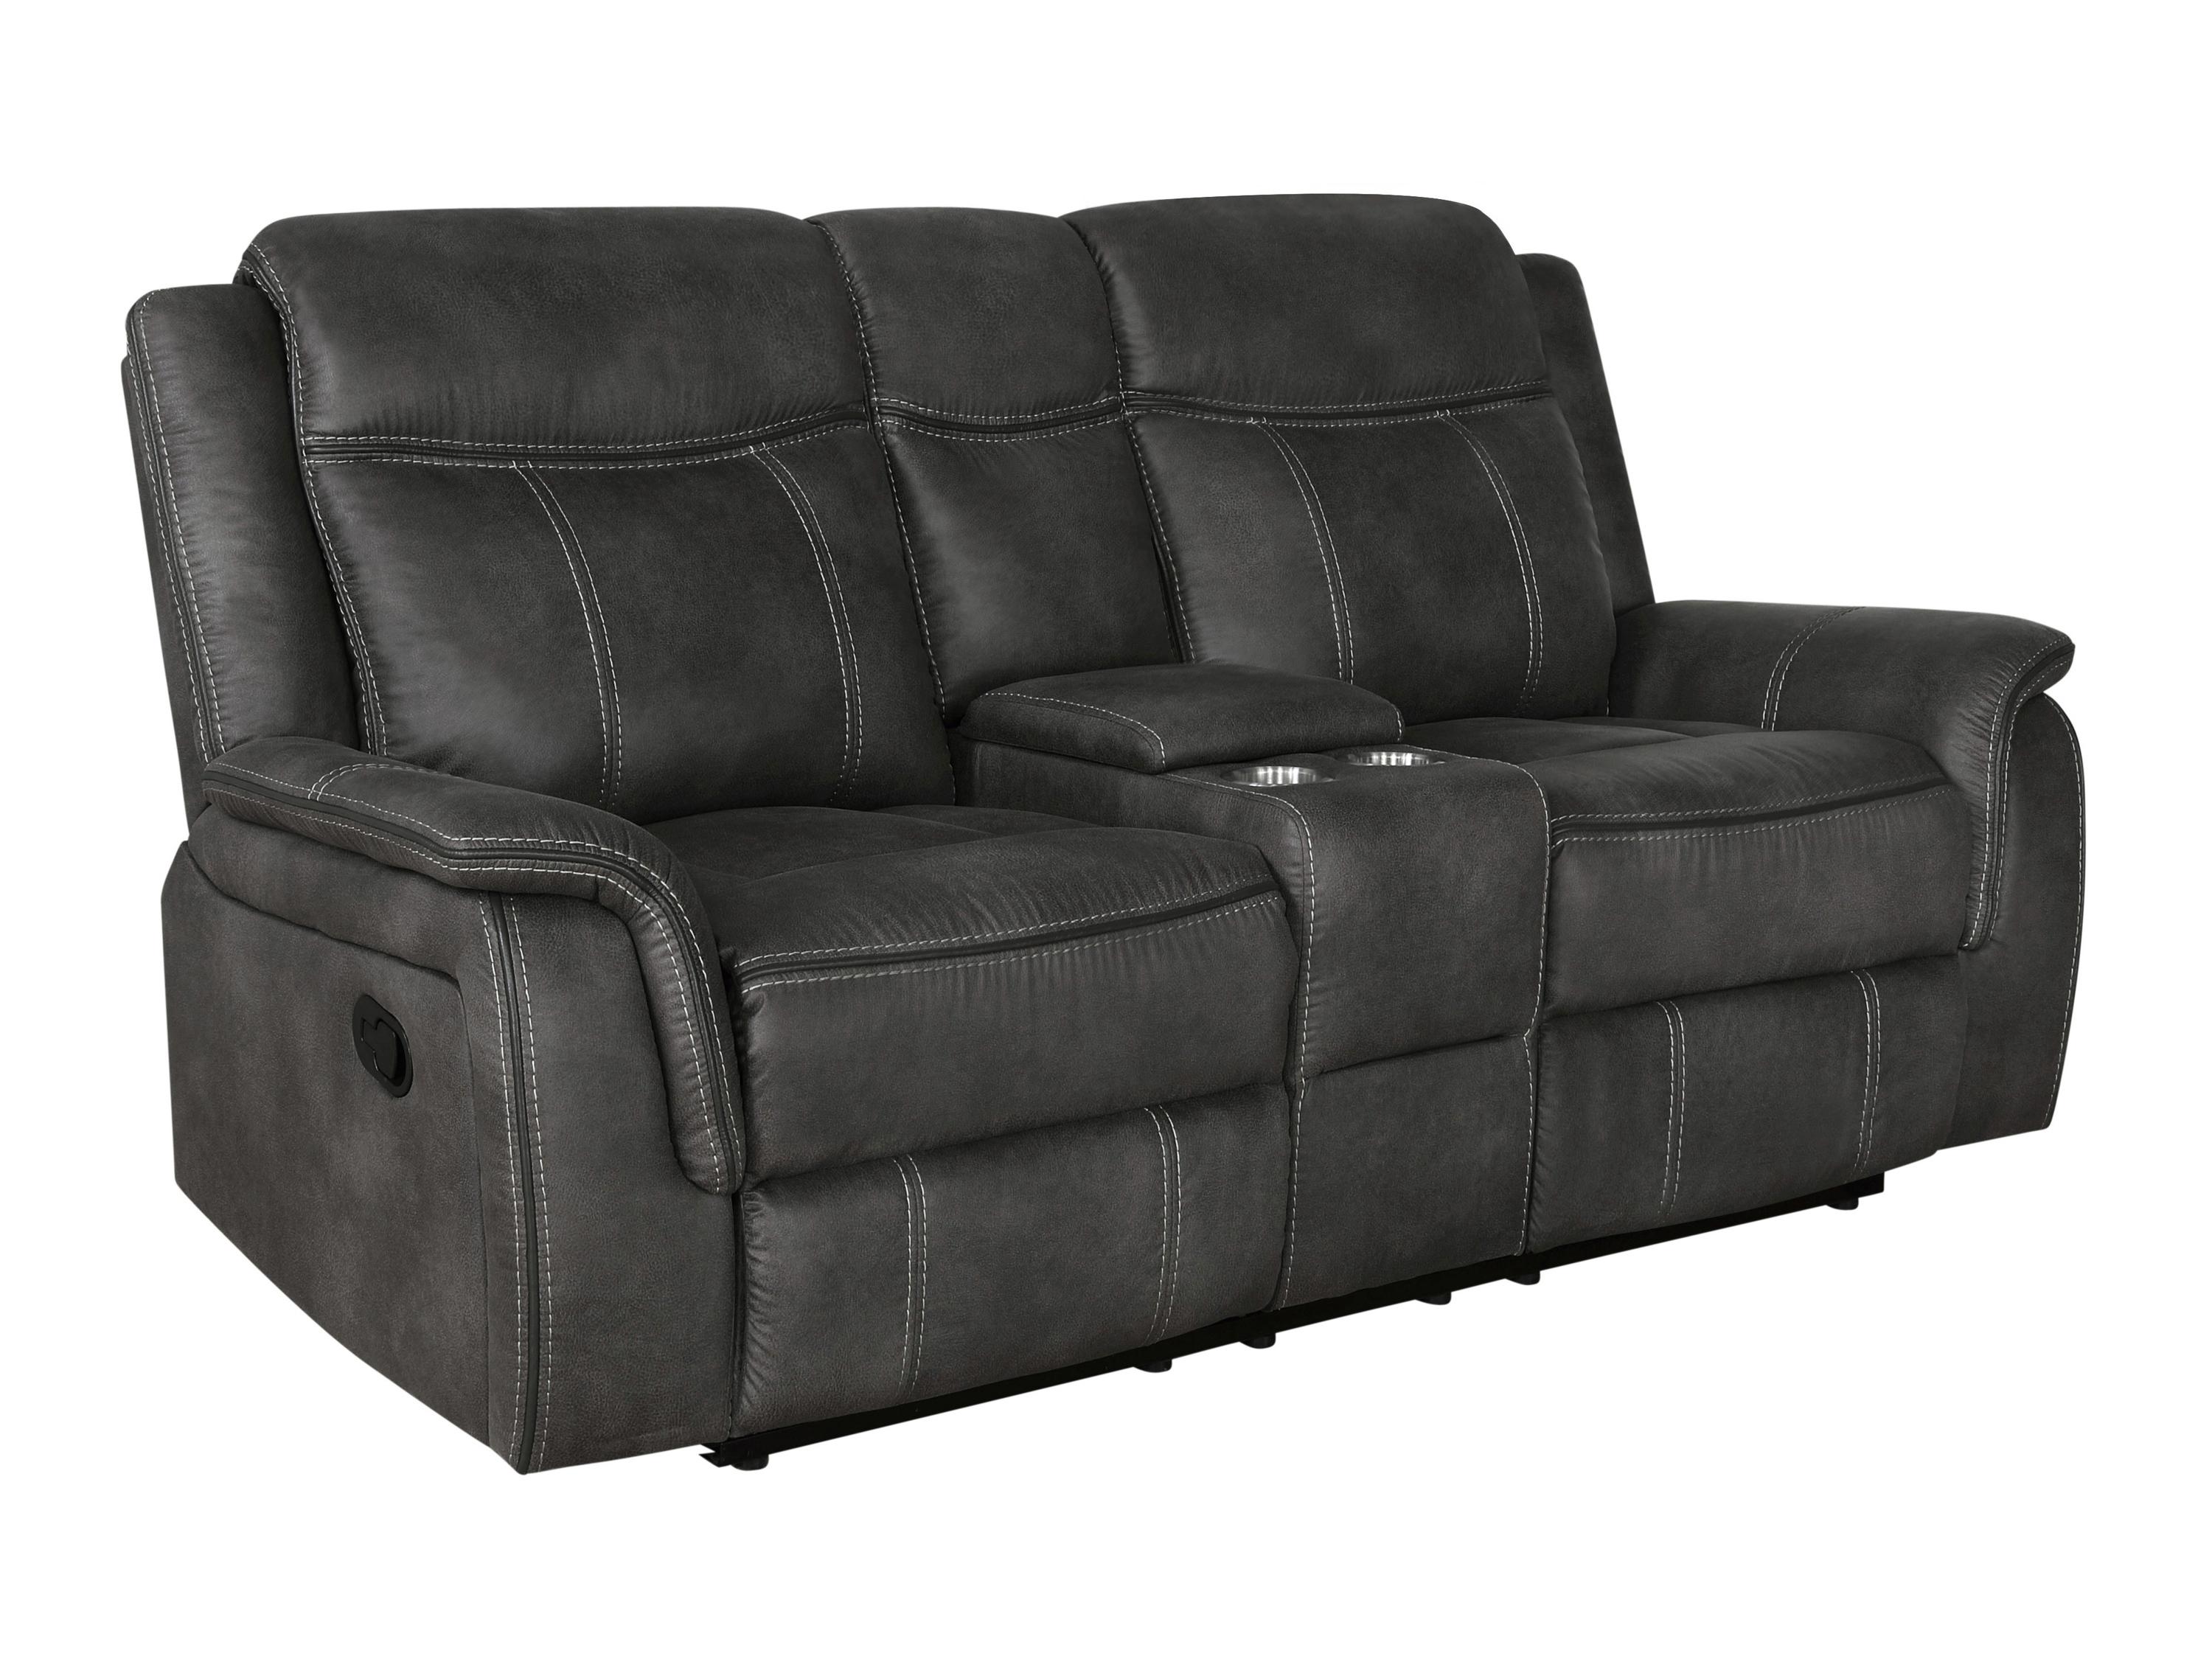 Transitional Motion Loveseat 603505 Lawrence 603505 in Charcoal 